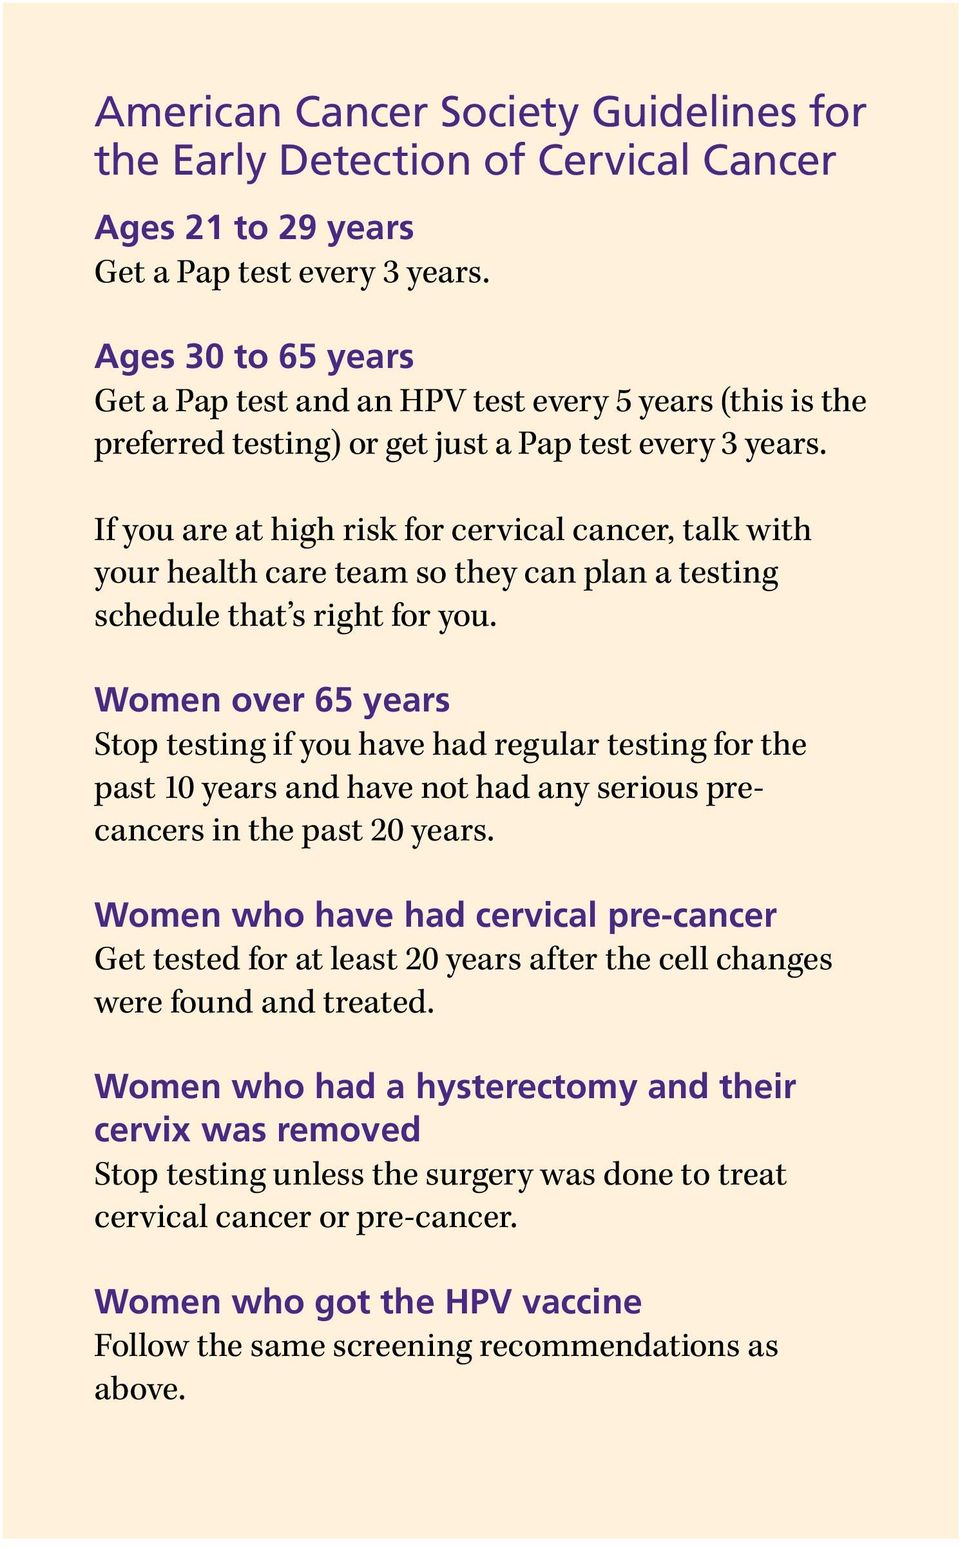 If you are at high risk for cervical cancer, talk with your health care team so they can plan a testing schedule that s right for you.